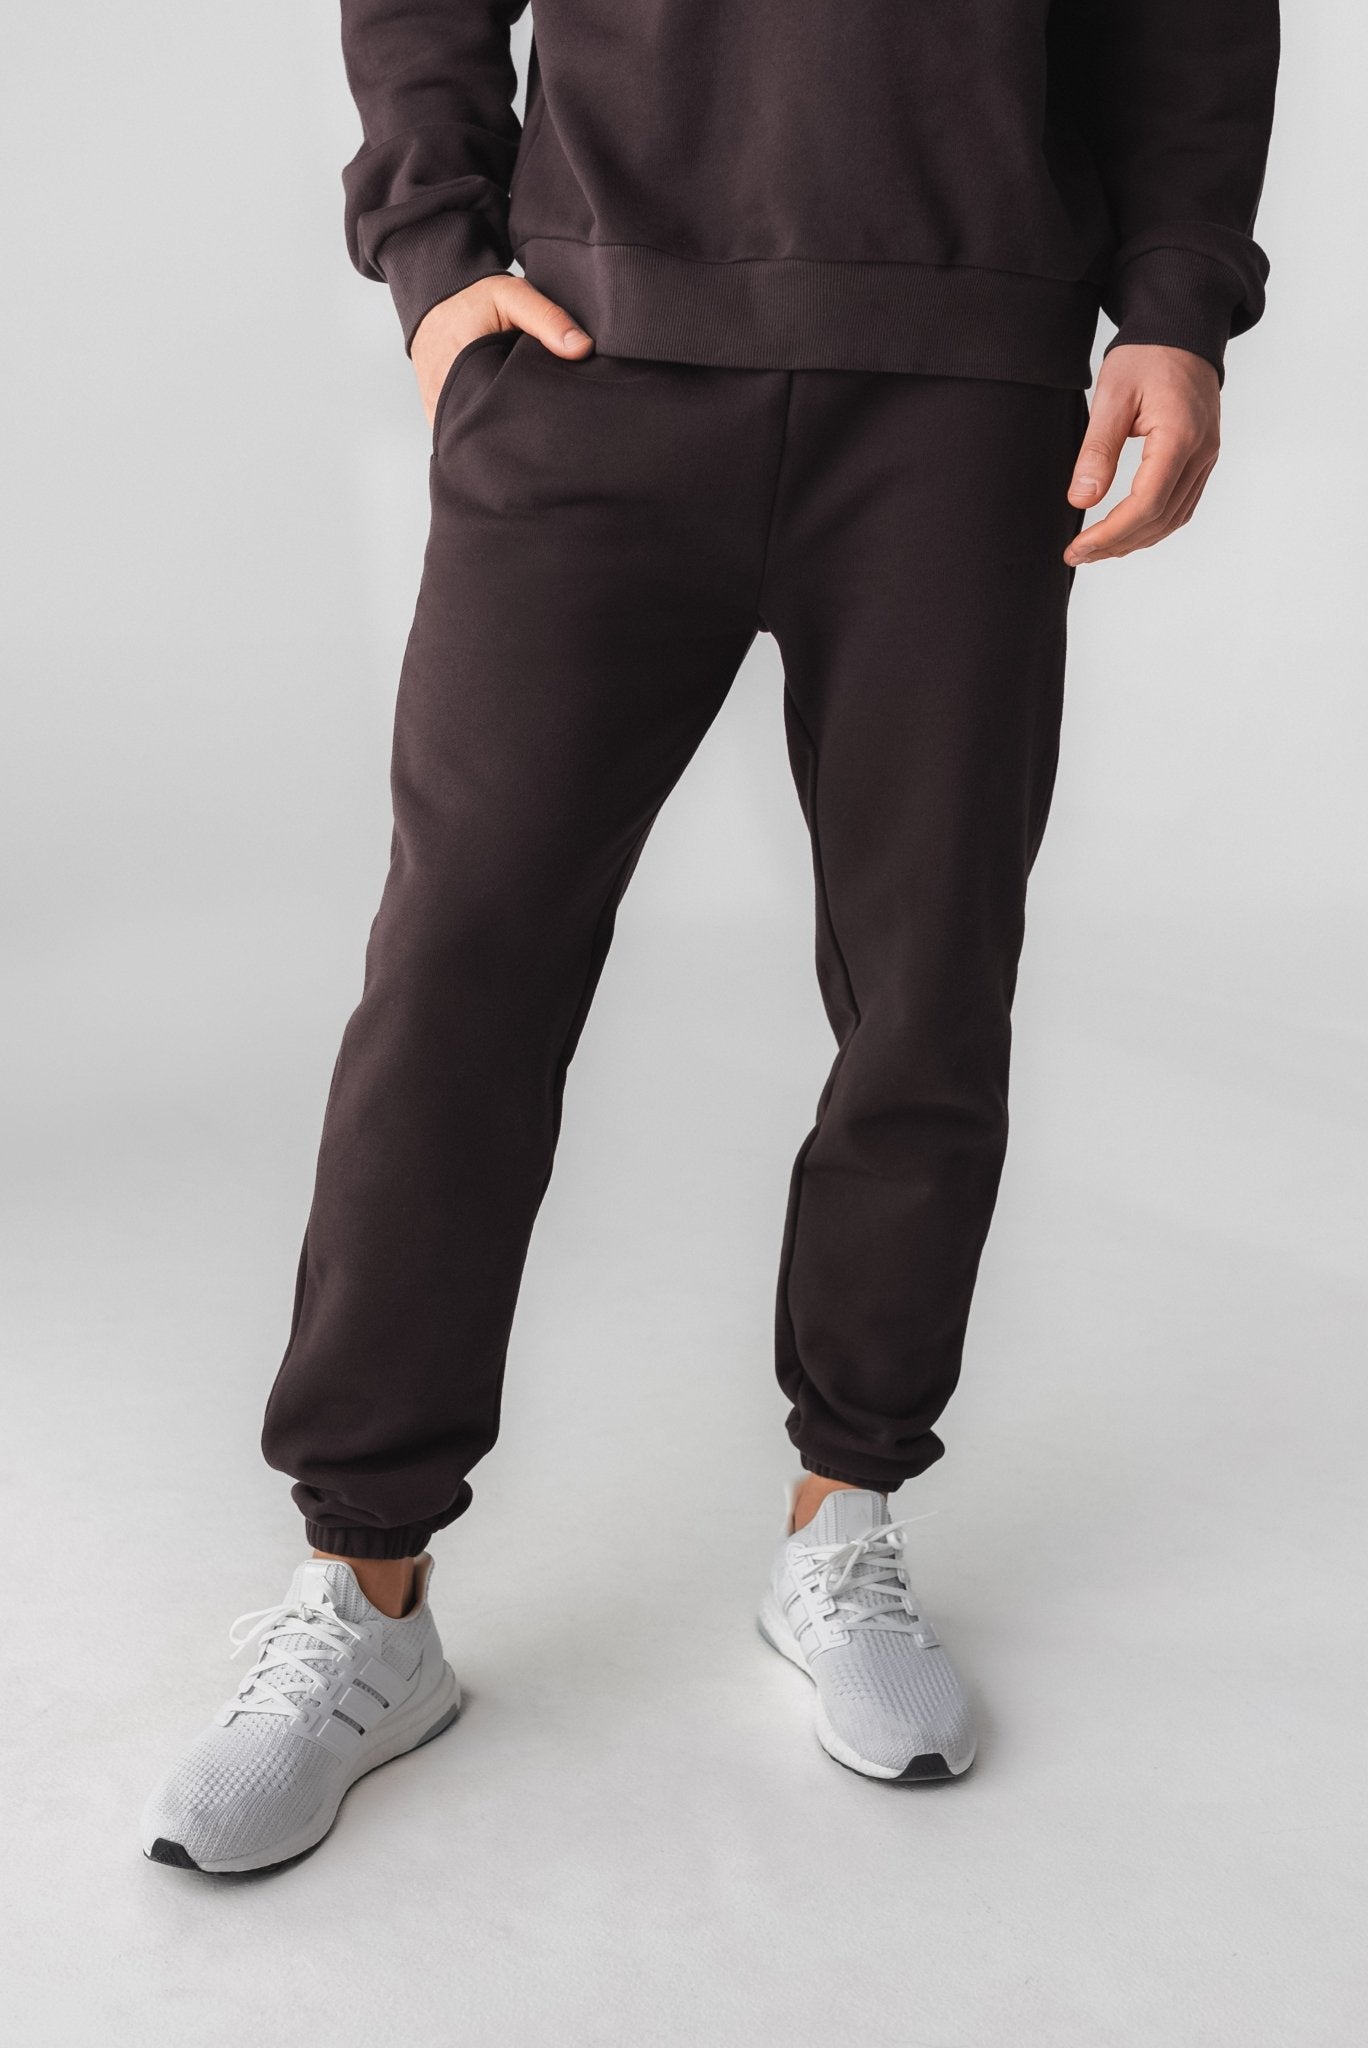 A man wearing Cozy Jogger - Obsidian, Gender Neutral Jogger from Vitality Athletic and Athleisure Wear